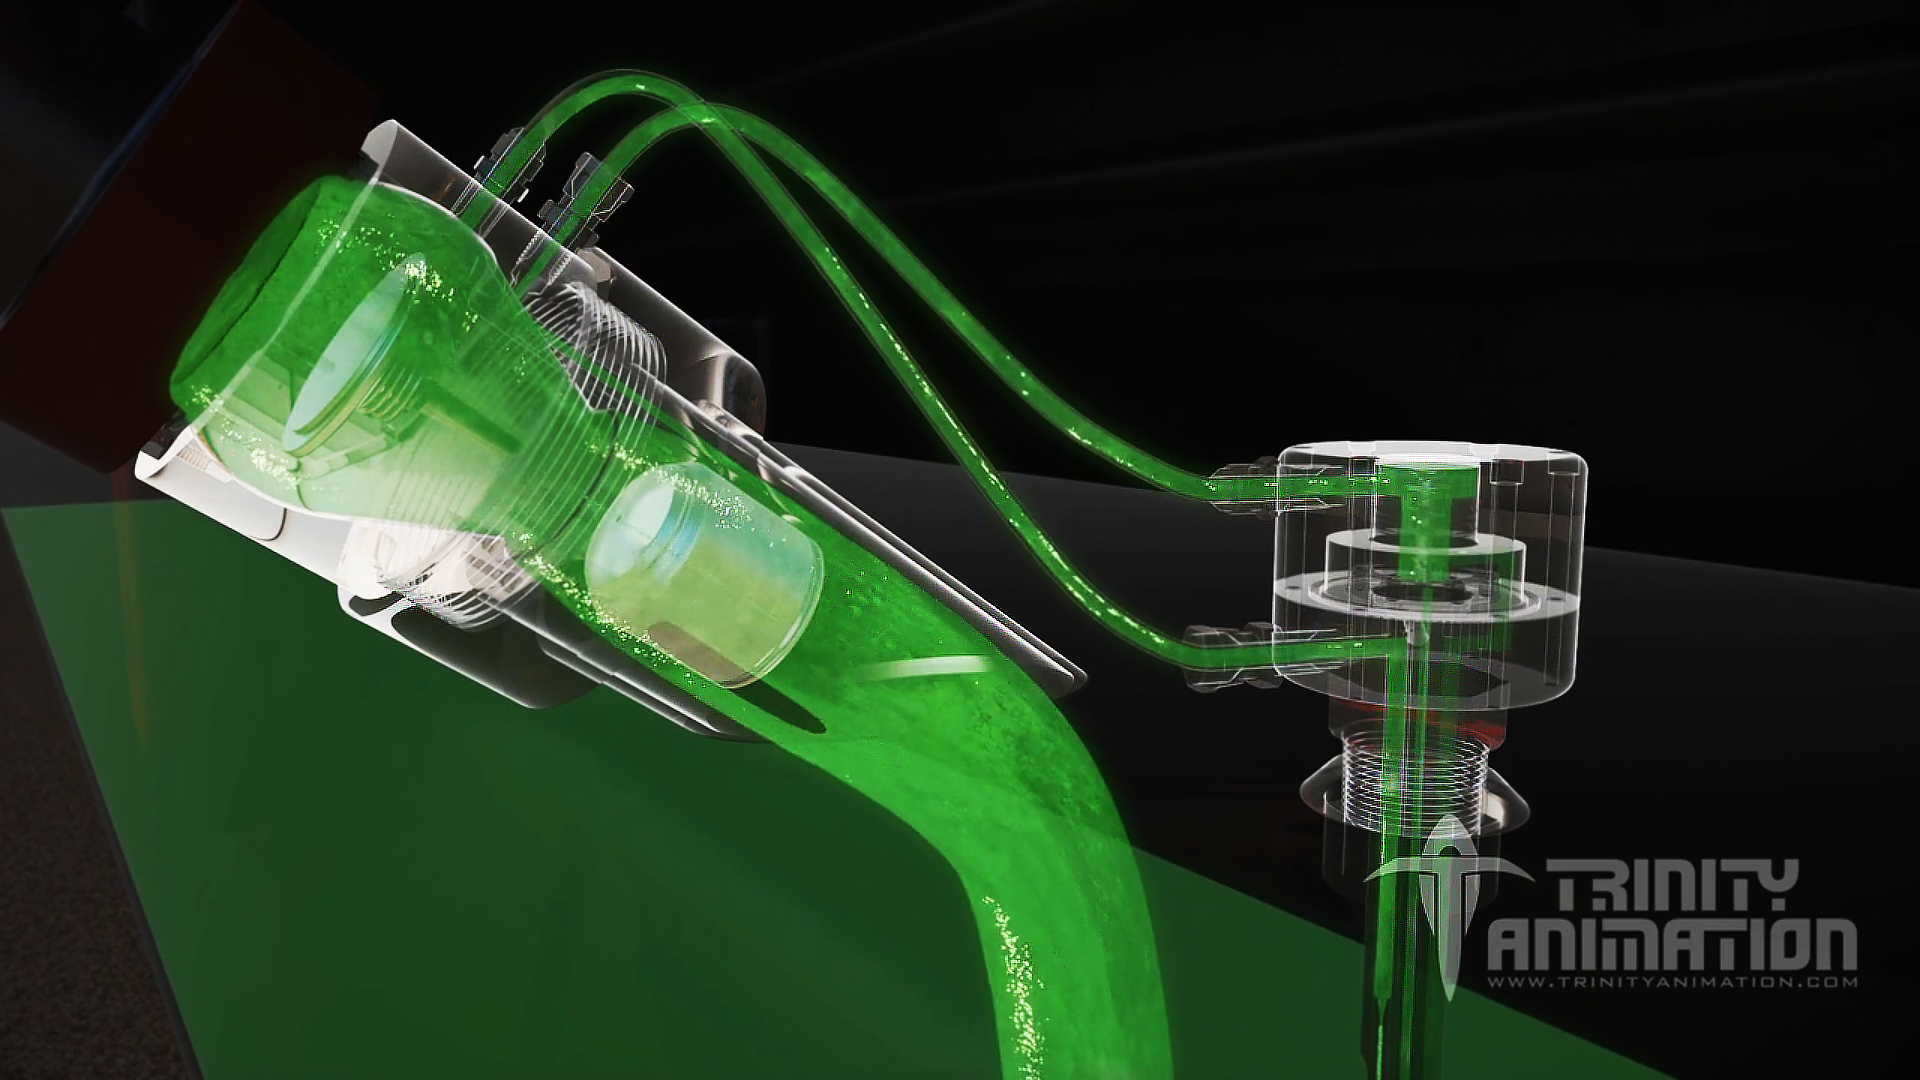 This is a 3D rendered image from Trinity's cad animation that explains how the StillX fuel system operates. This image display the receiver, the jet feed line, and the control valve. Once the jet feed line opens the control valve, fuel flows through the valve and into the tank which is being displayed in this image. The fuel is represented as a green liquid so it stands out against the other elements, and the parts that the fuel flows through are transparent so viewers can observe the interior and understand how it operates.